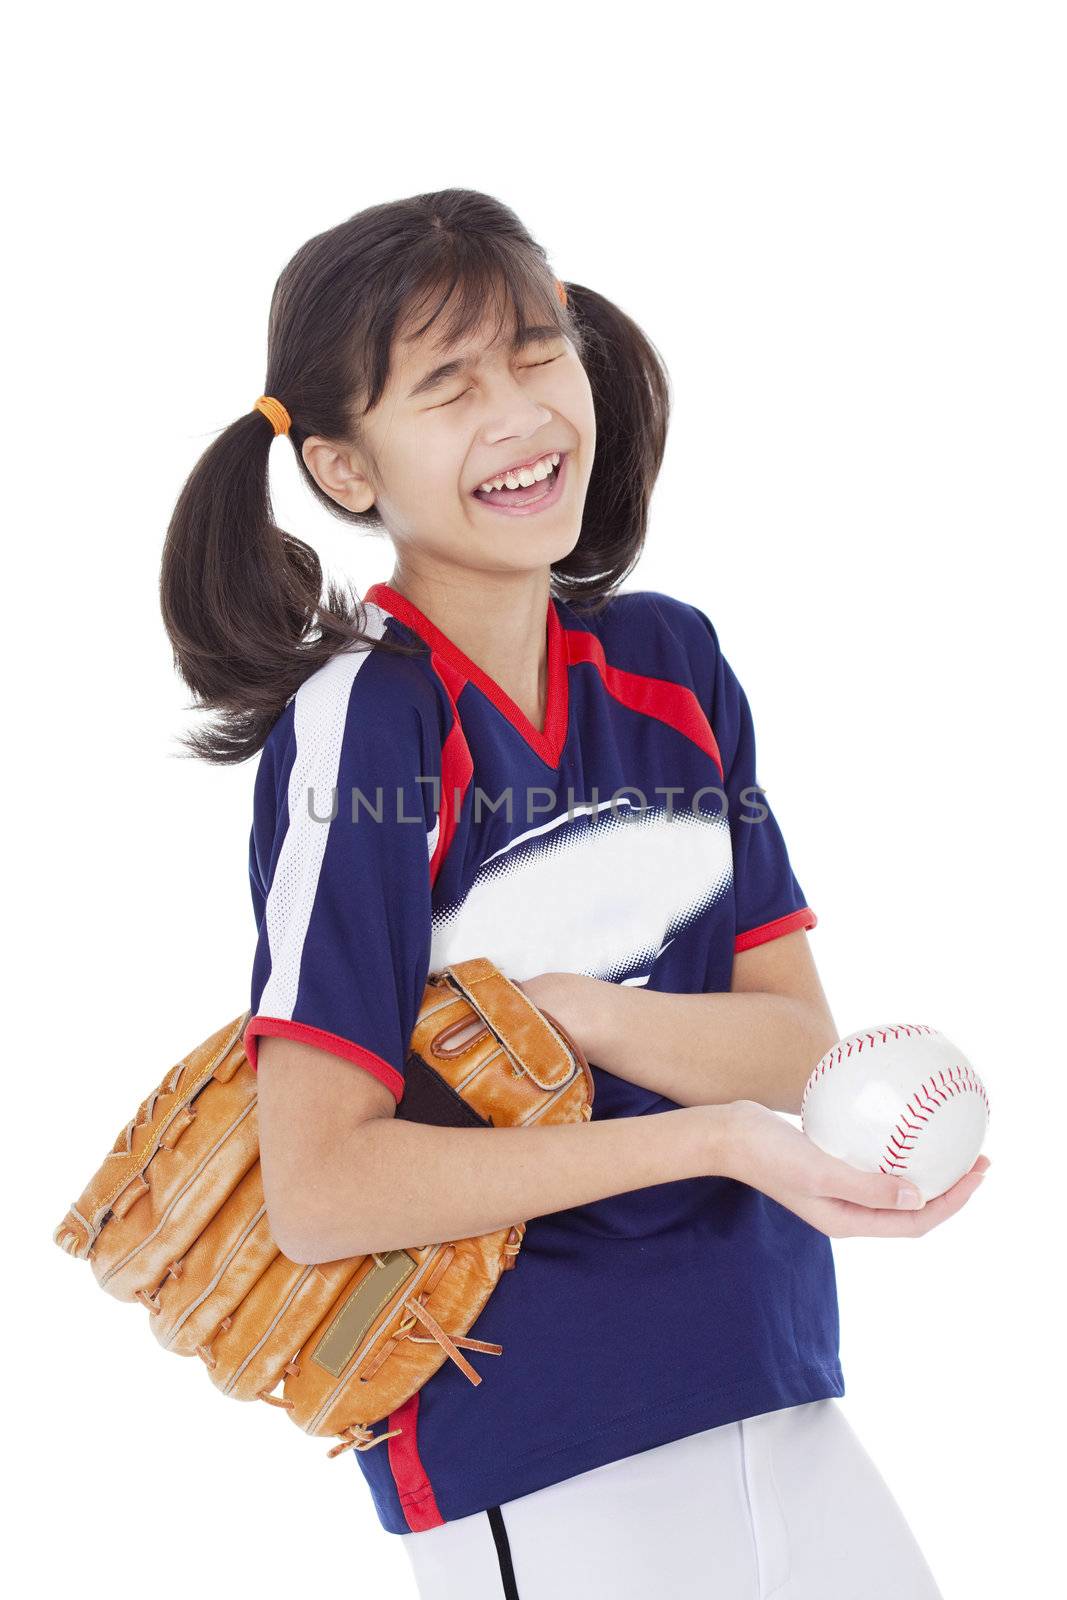 Biracial asian girl laughing while holding softball and mitt, isolated